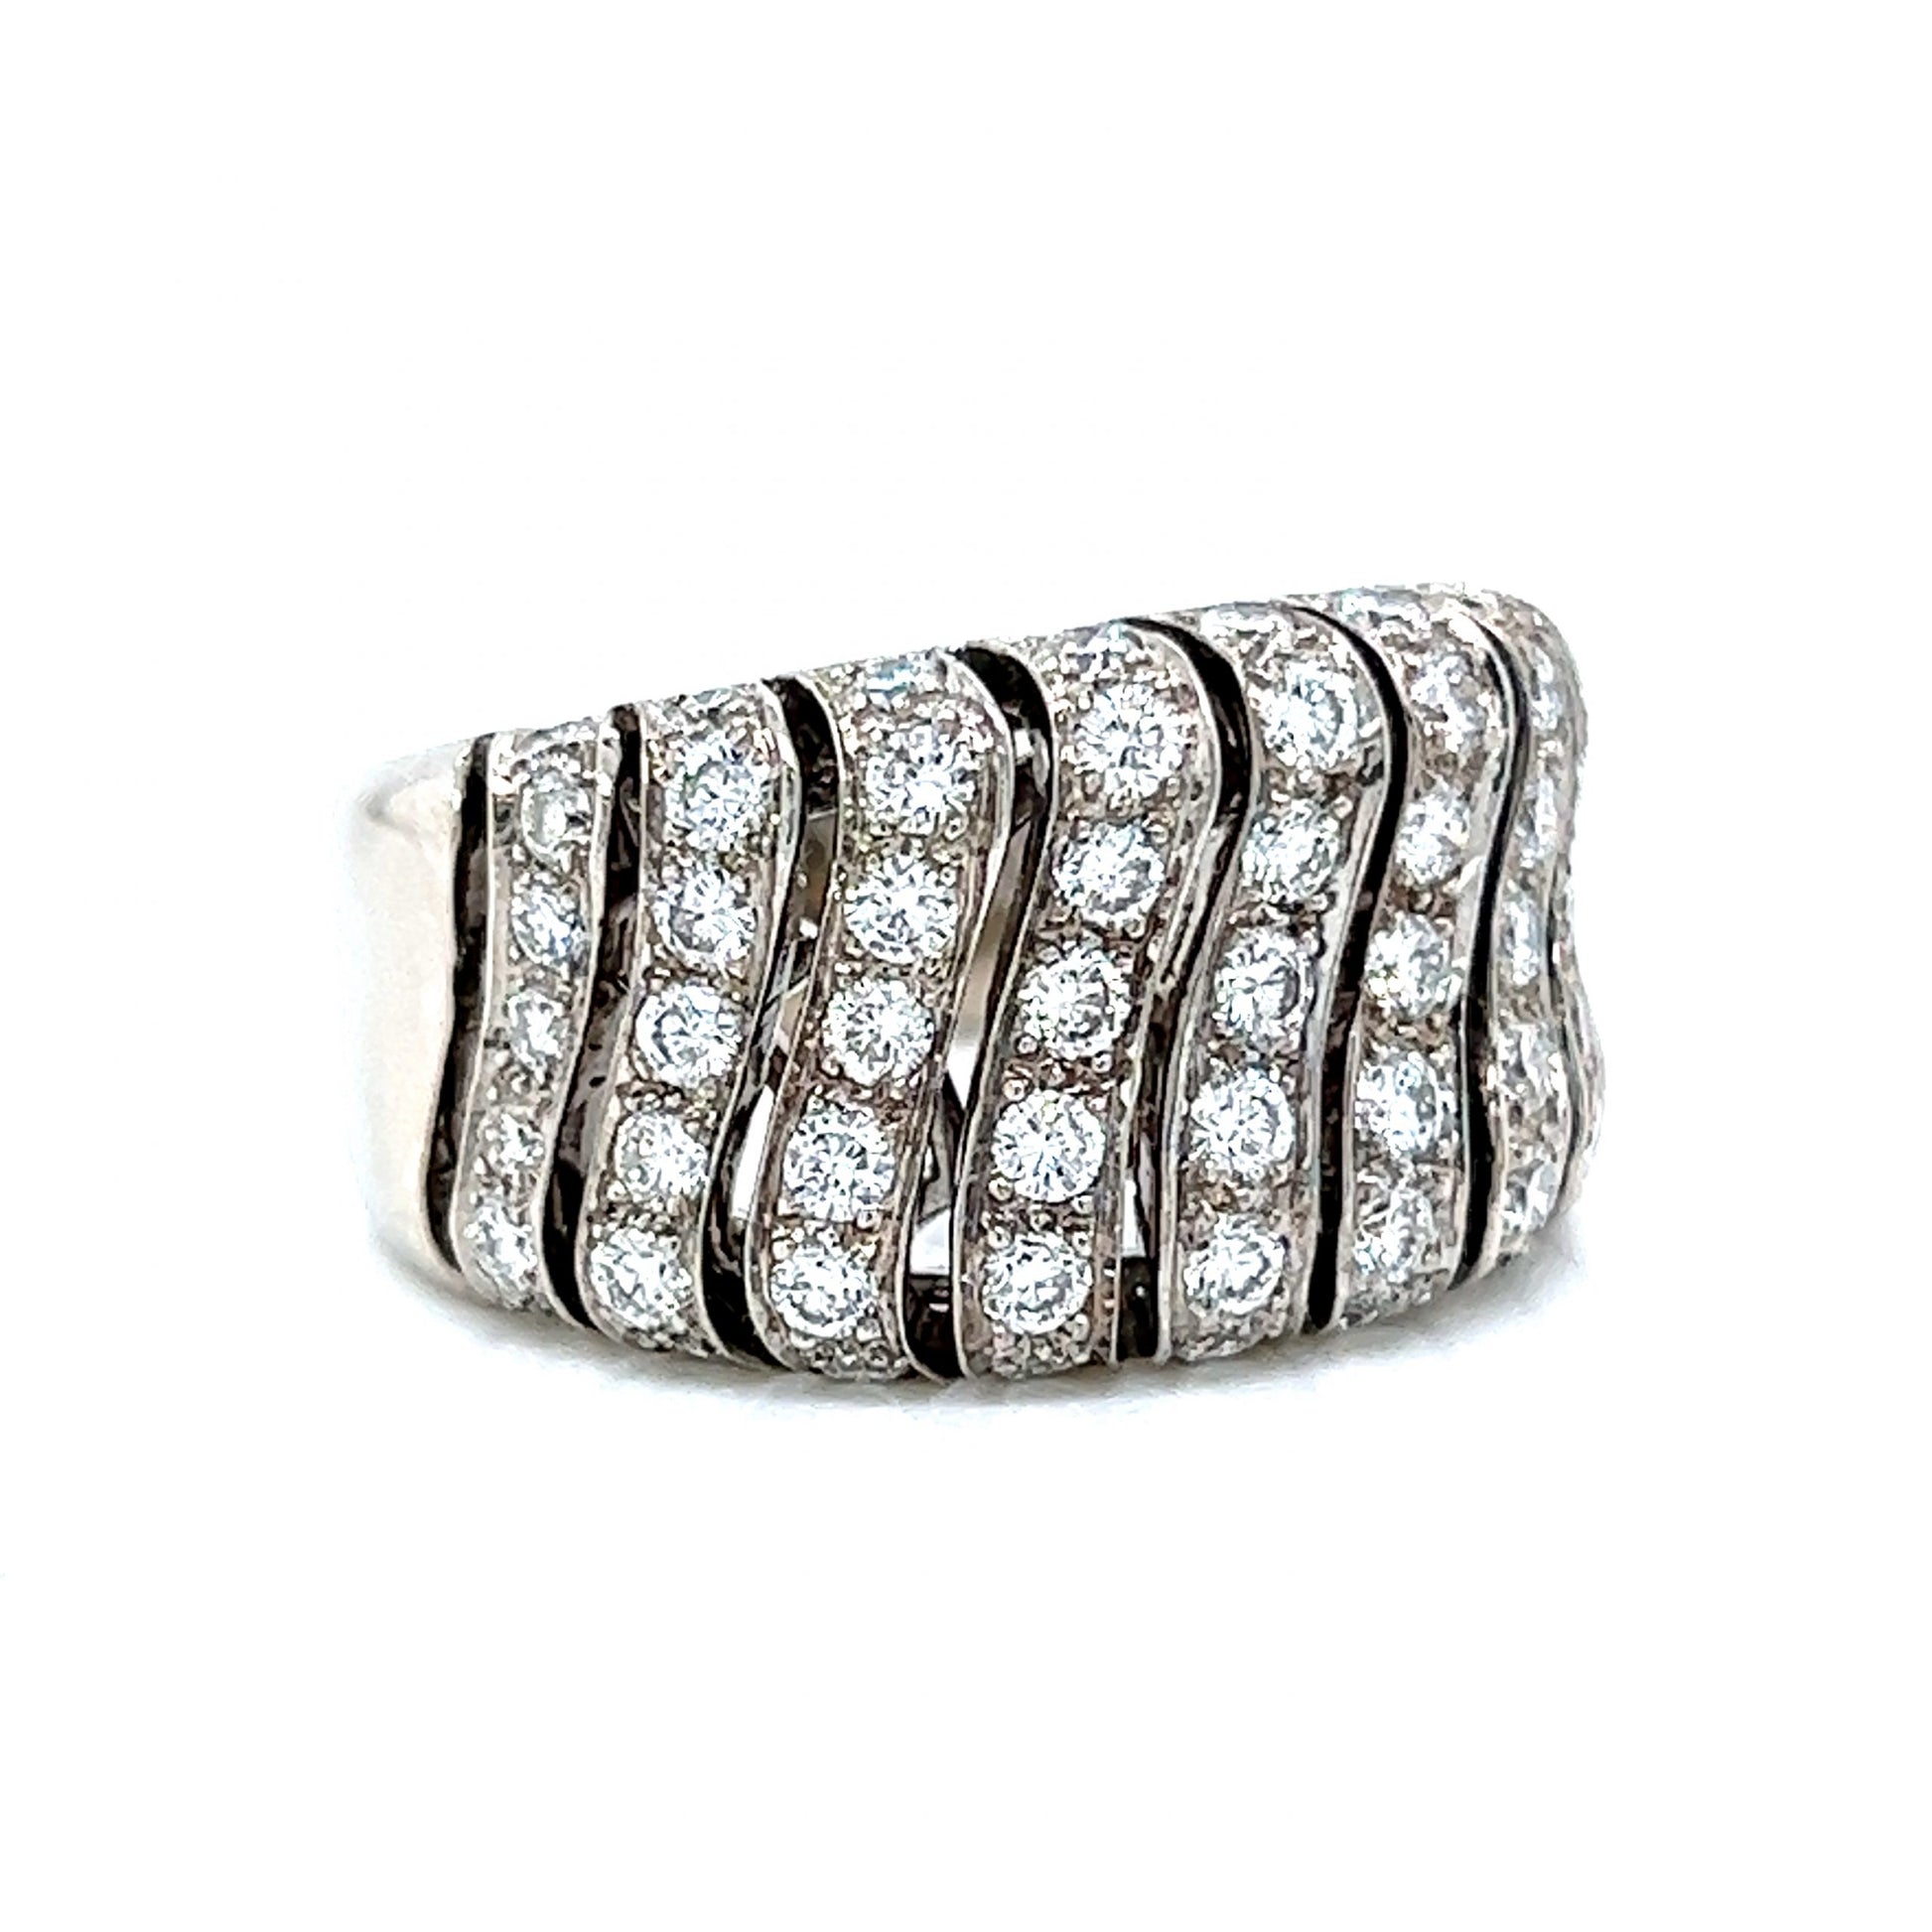 Pave Diamond Wave Cocktail Ring in 14k White GoldComposition: 14 Karat White Gold Ring Size: 6.5 Total Diamond Weight: 1.57ct Total Gram Weight: 11.2 g Inscription: 14k
      